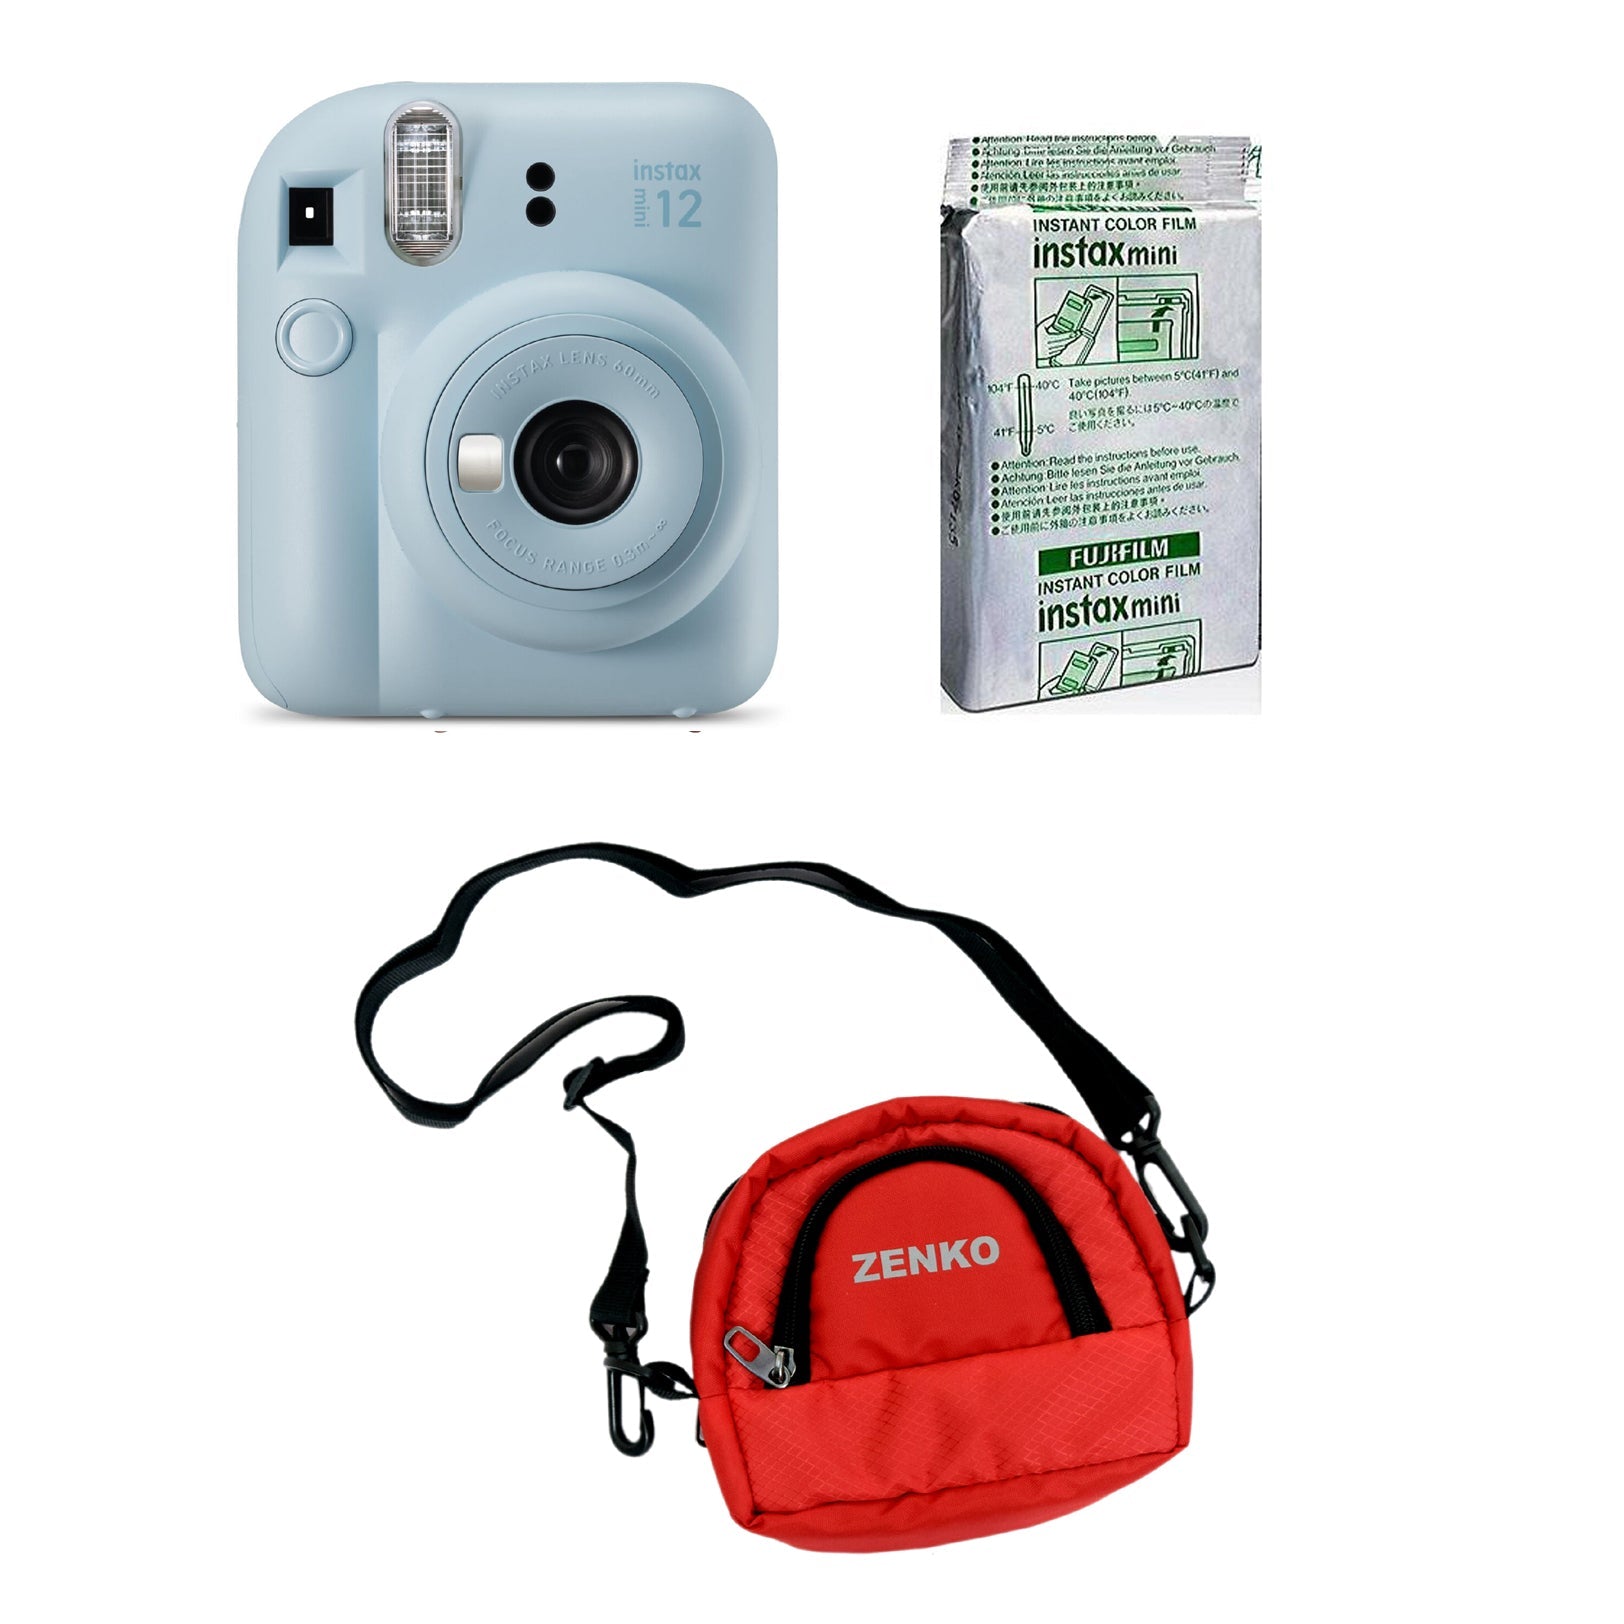 FUJIFILM INSTAX Mini 12 Instant Film Camera with 10X1 Pack of Instant Film With Red Pouch Kit (Pastel Blue, 10 Exposures)